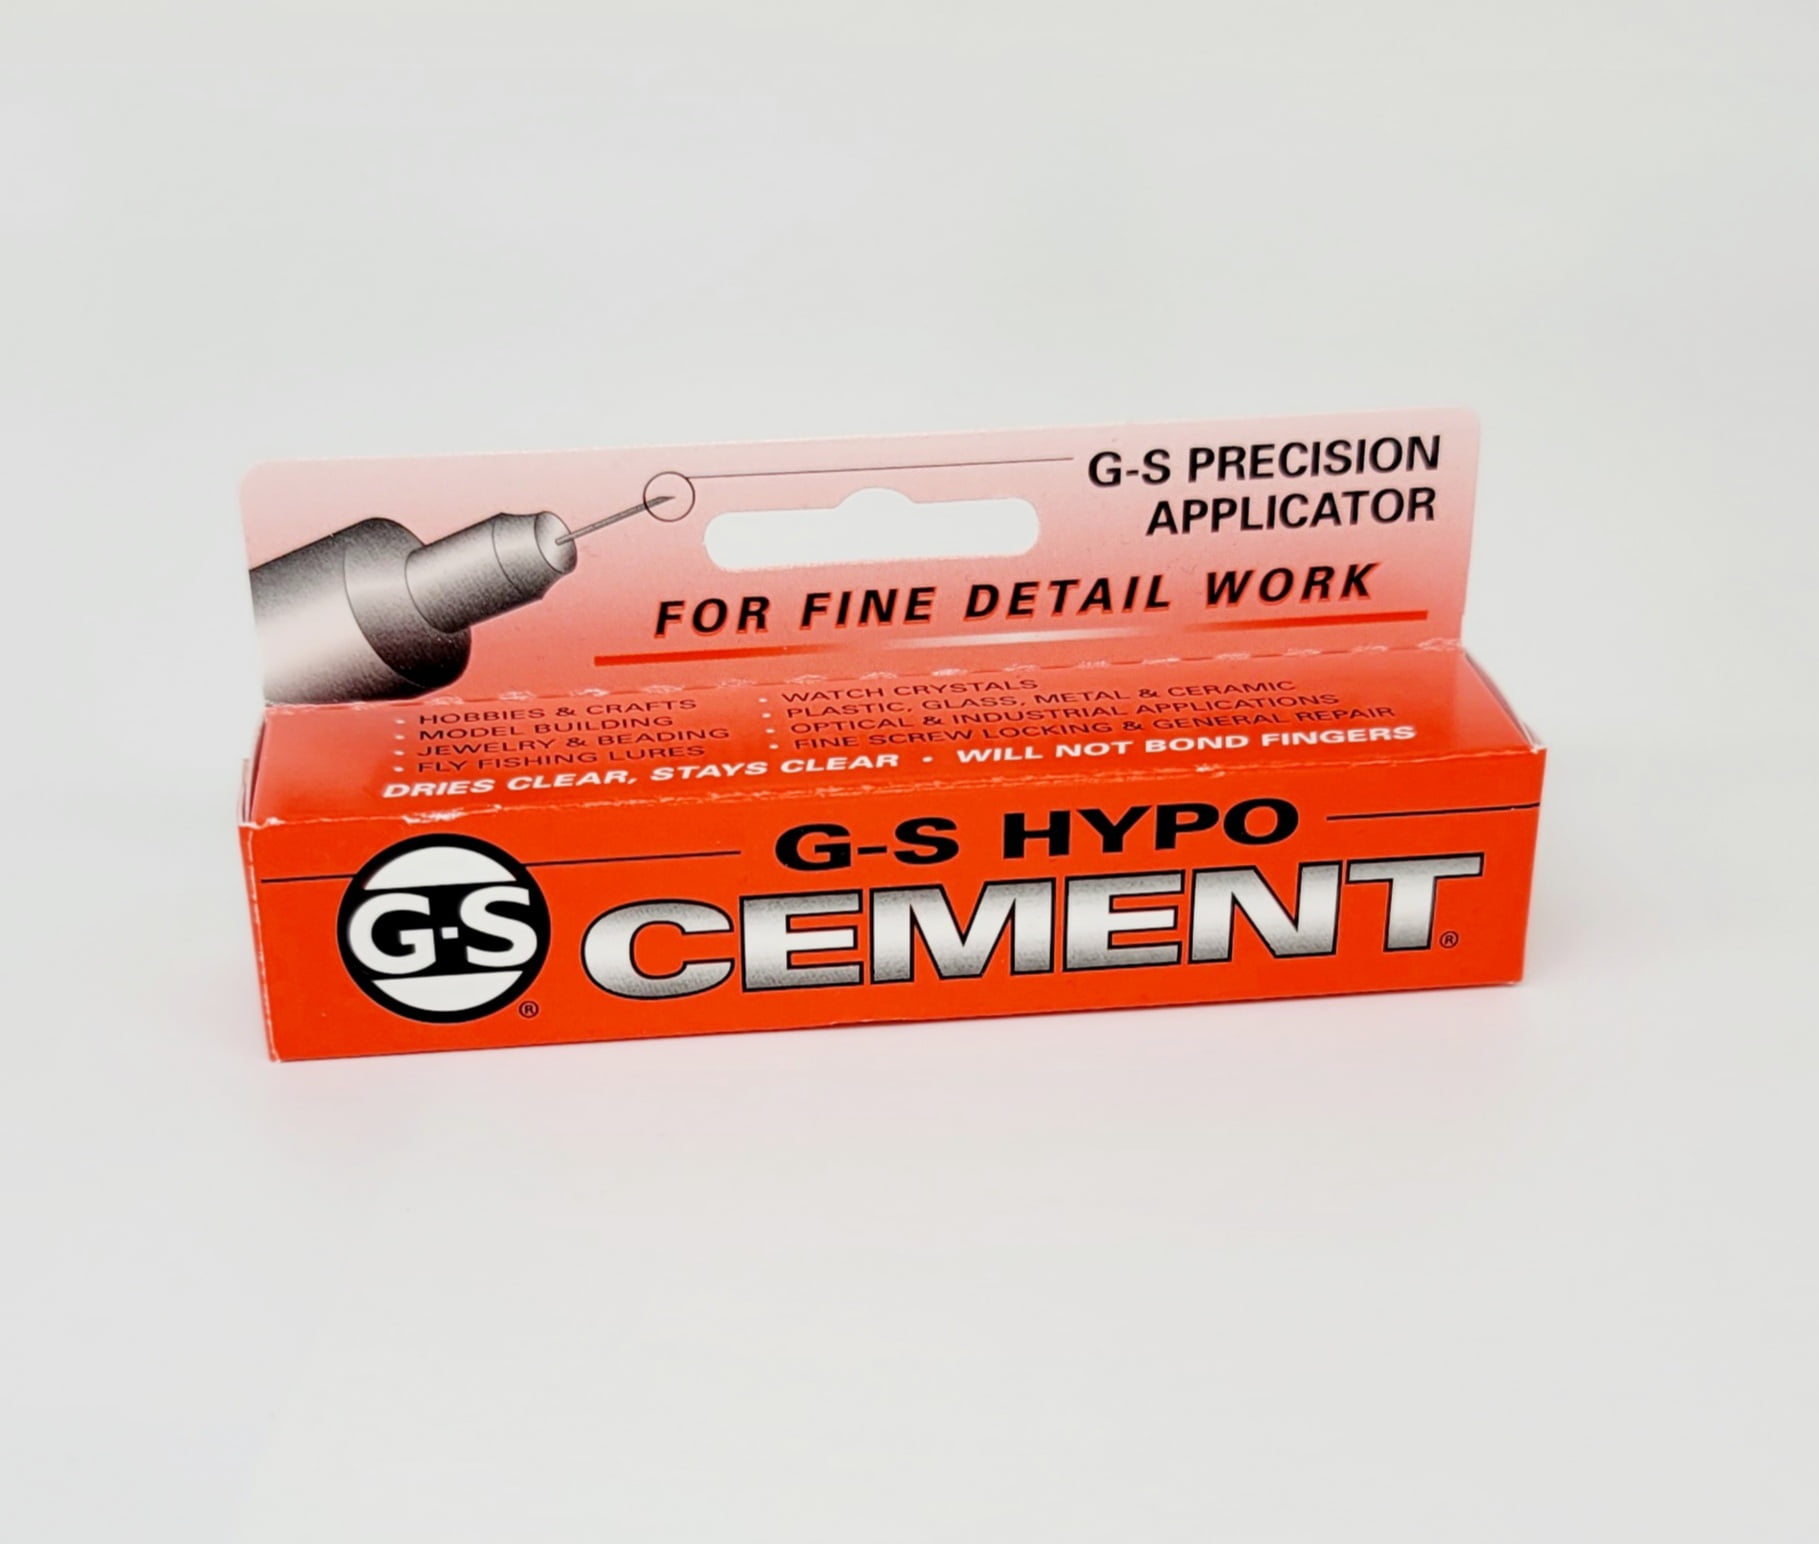 Precision Applicator G-S Hypo Cement Glue Applicator Dries Clear Jewelry Making Tools and Supplies